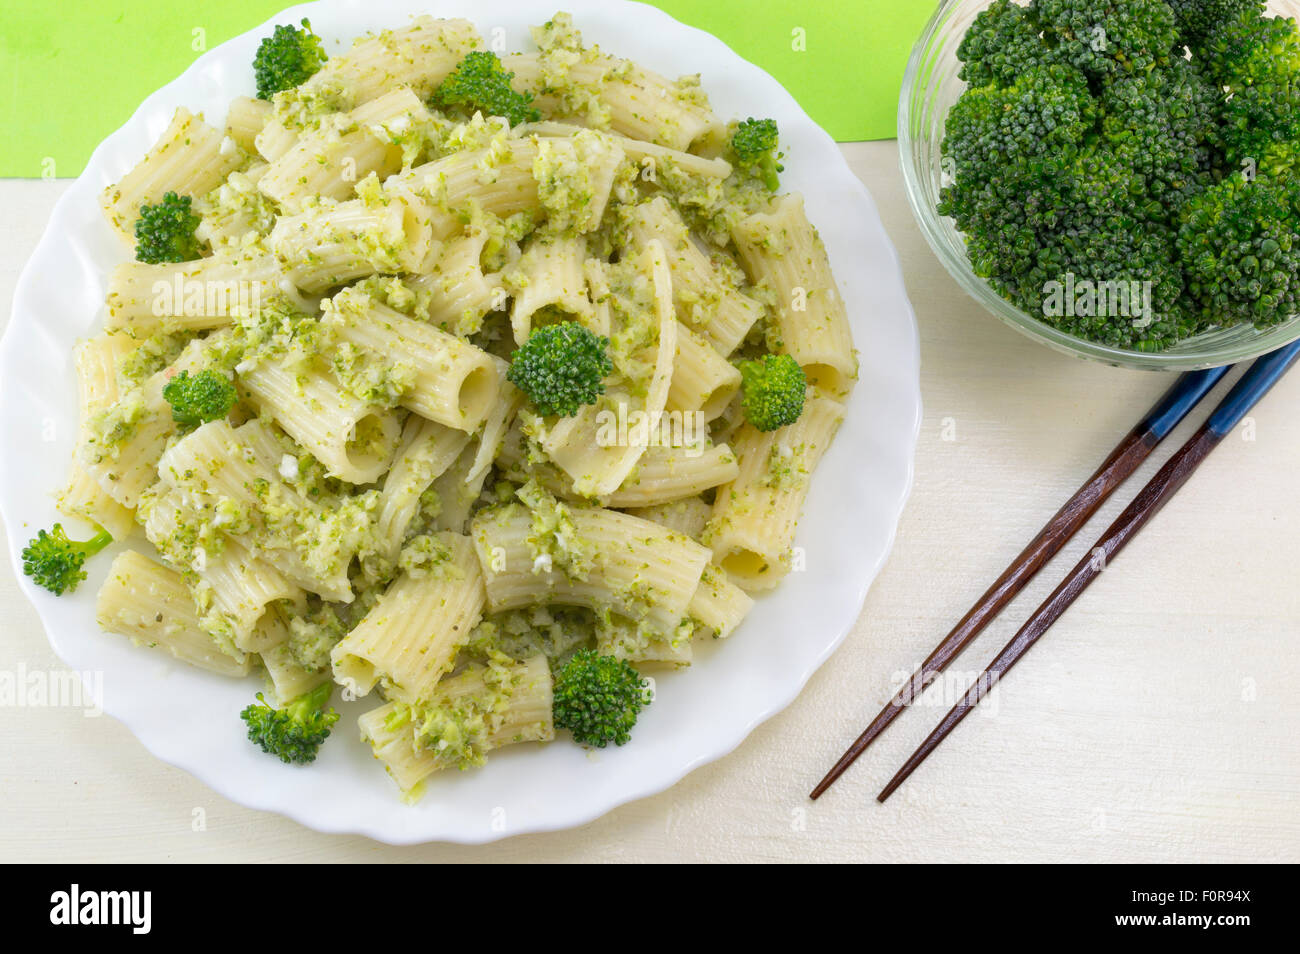 Cooked pasta with broccoli served with cooked broccoli in a white bow on a wooden table. Eating with chopsticks Stock Photo